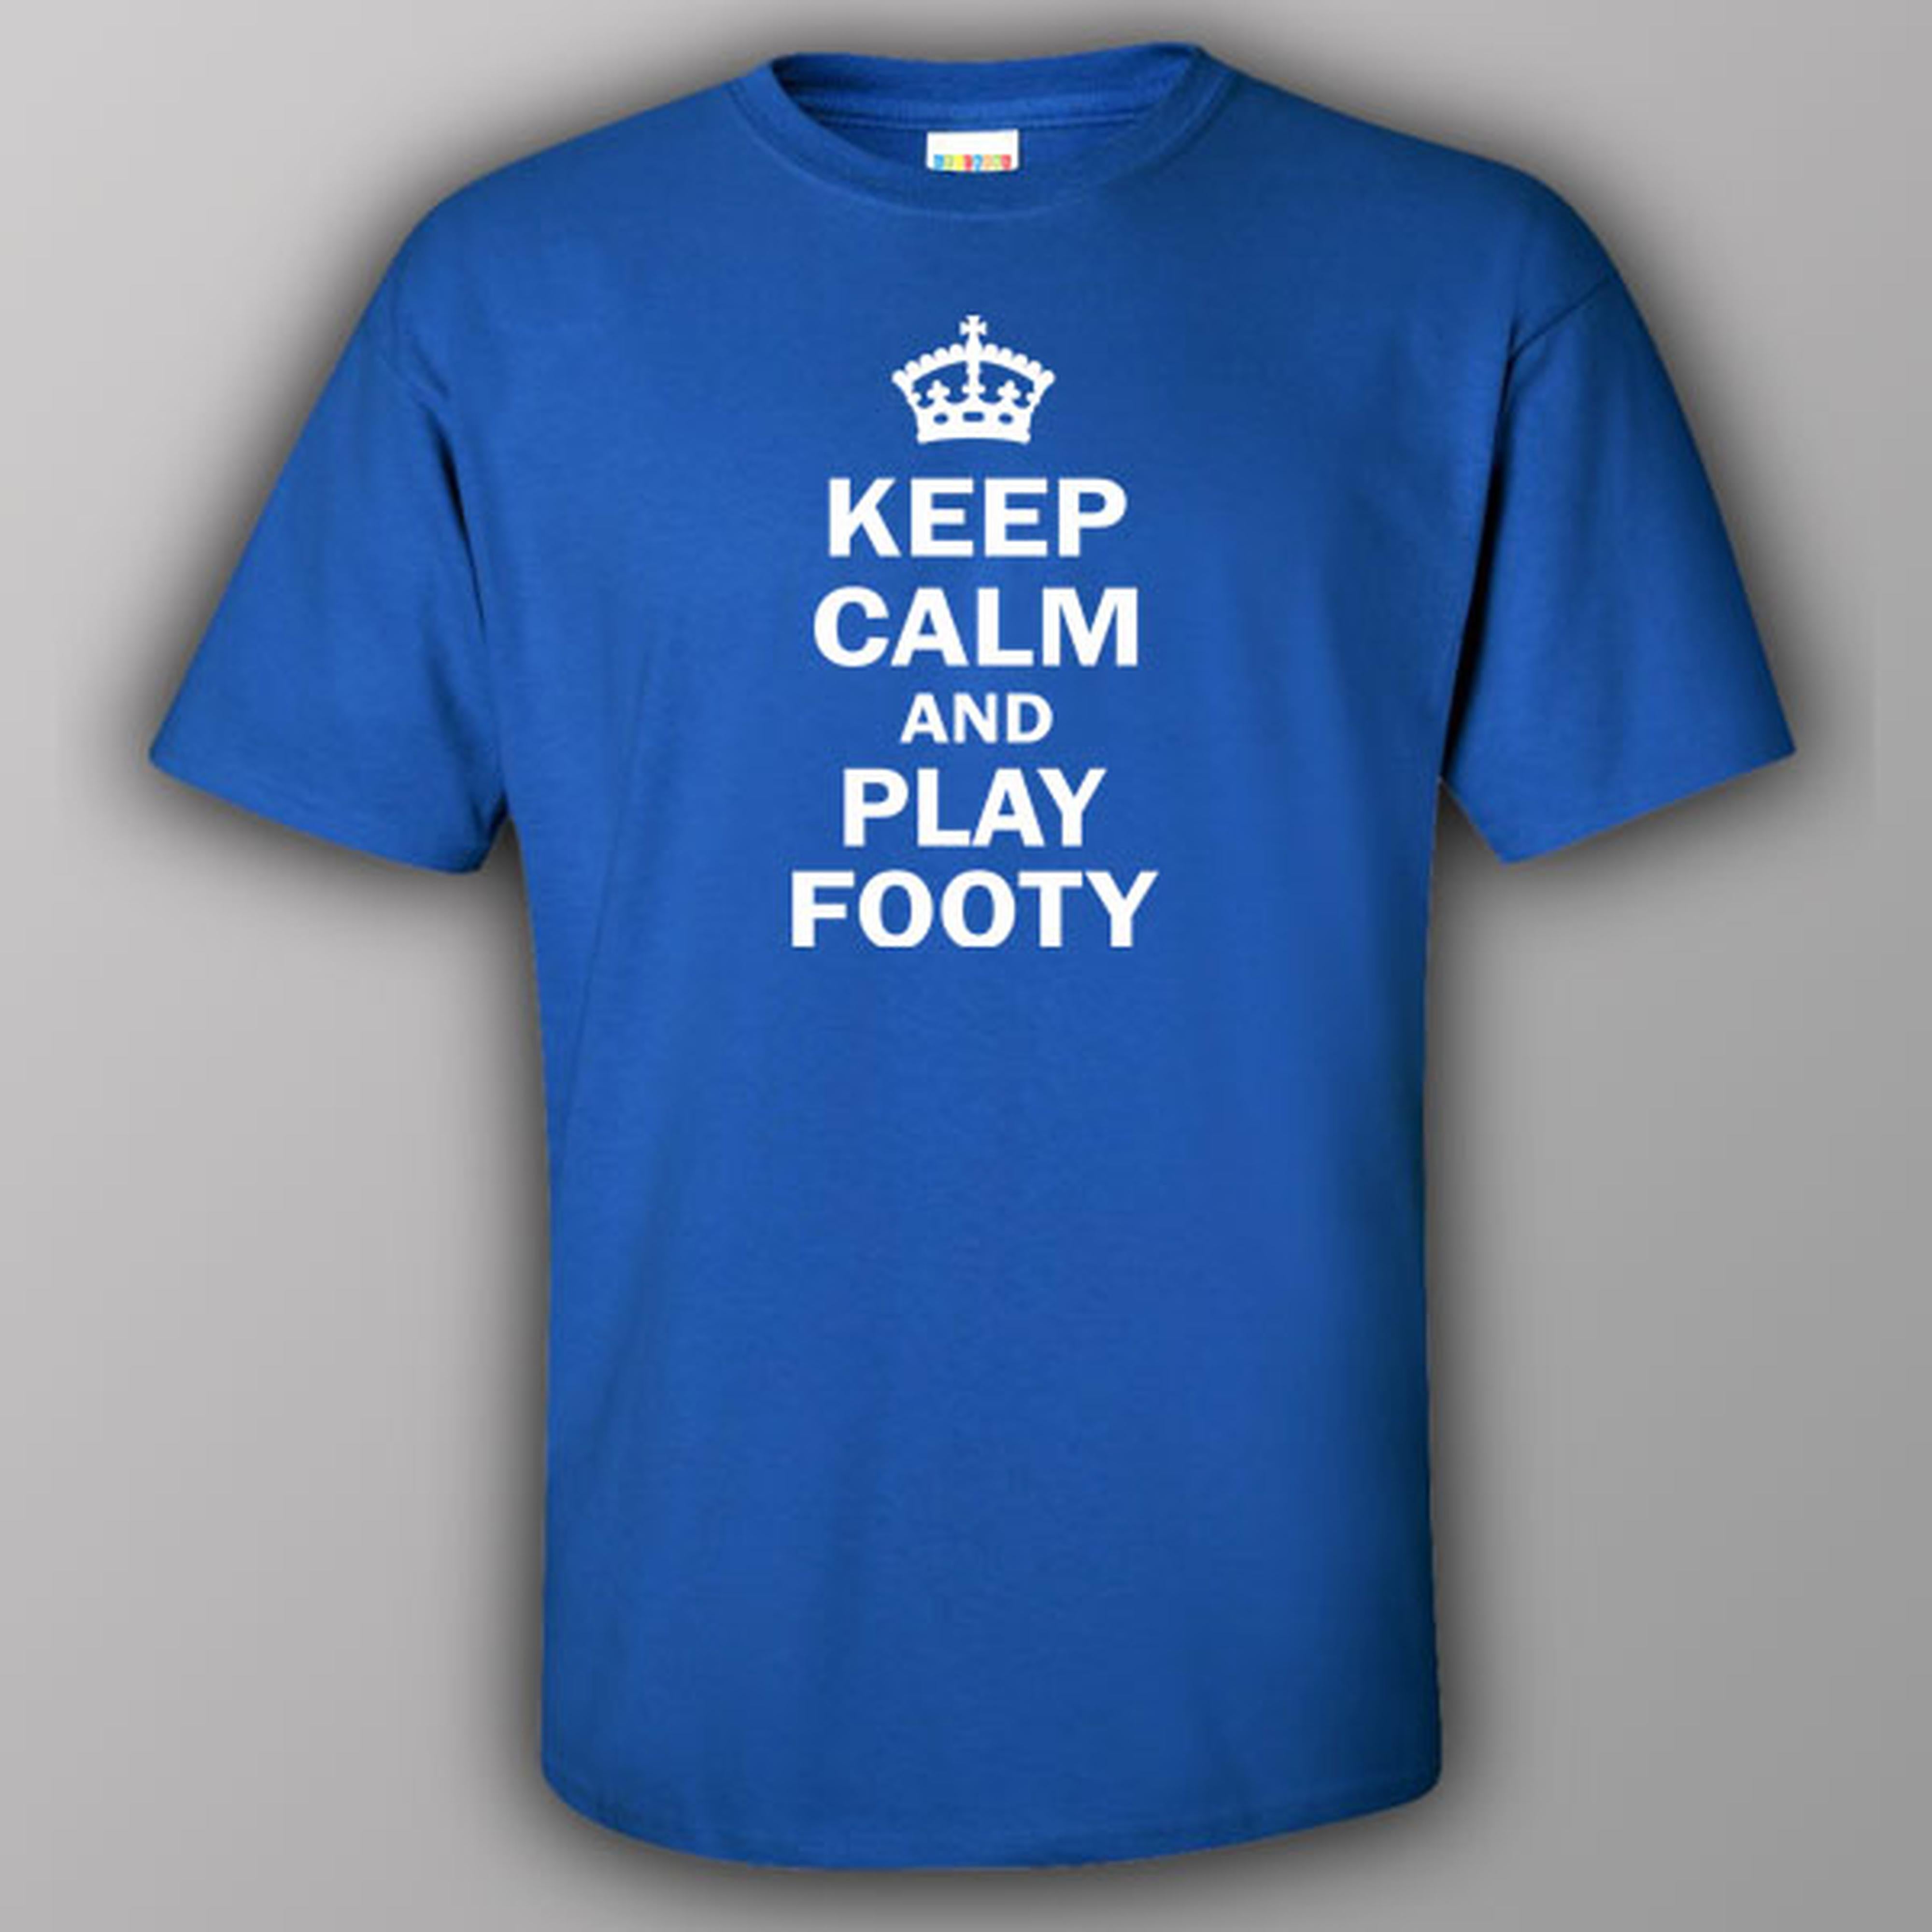 Keep calm and play footy - T-shirt